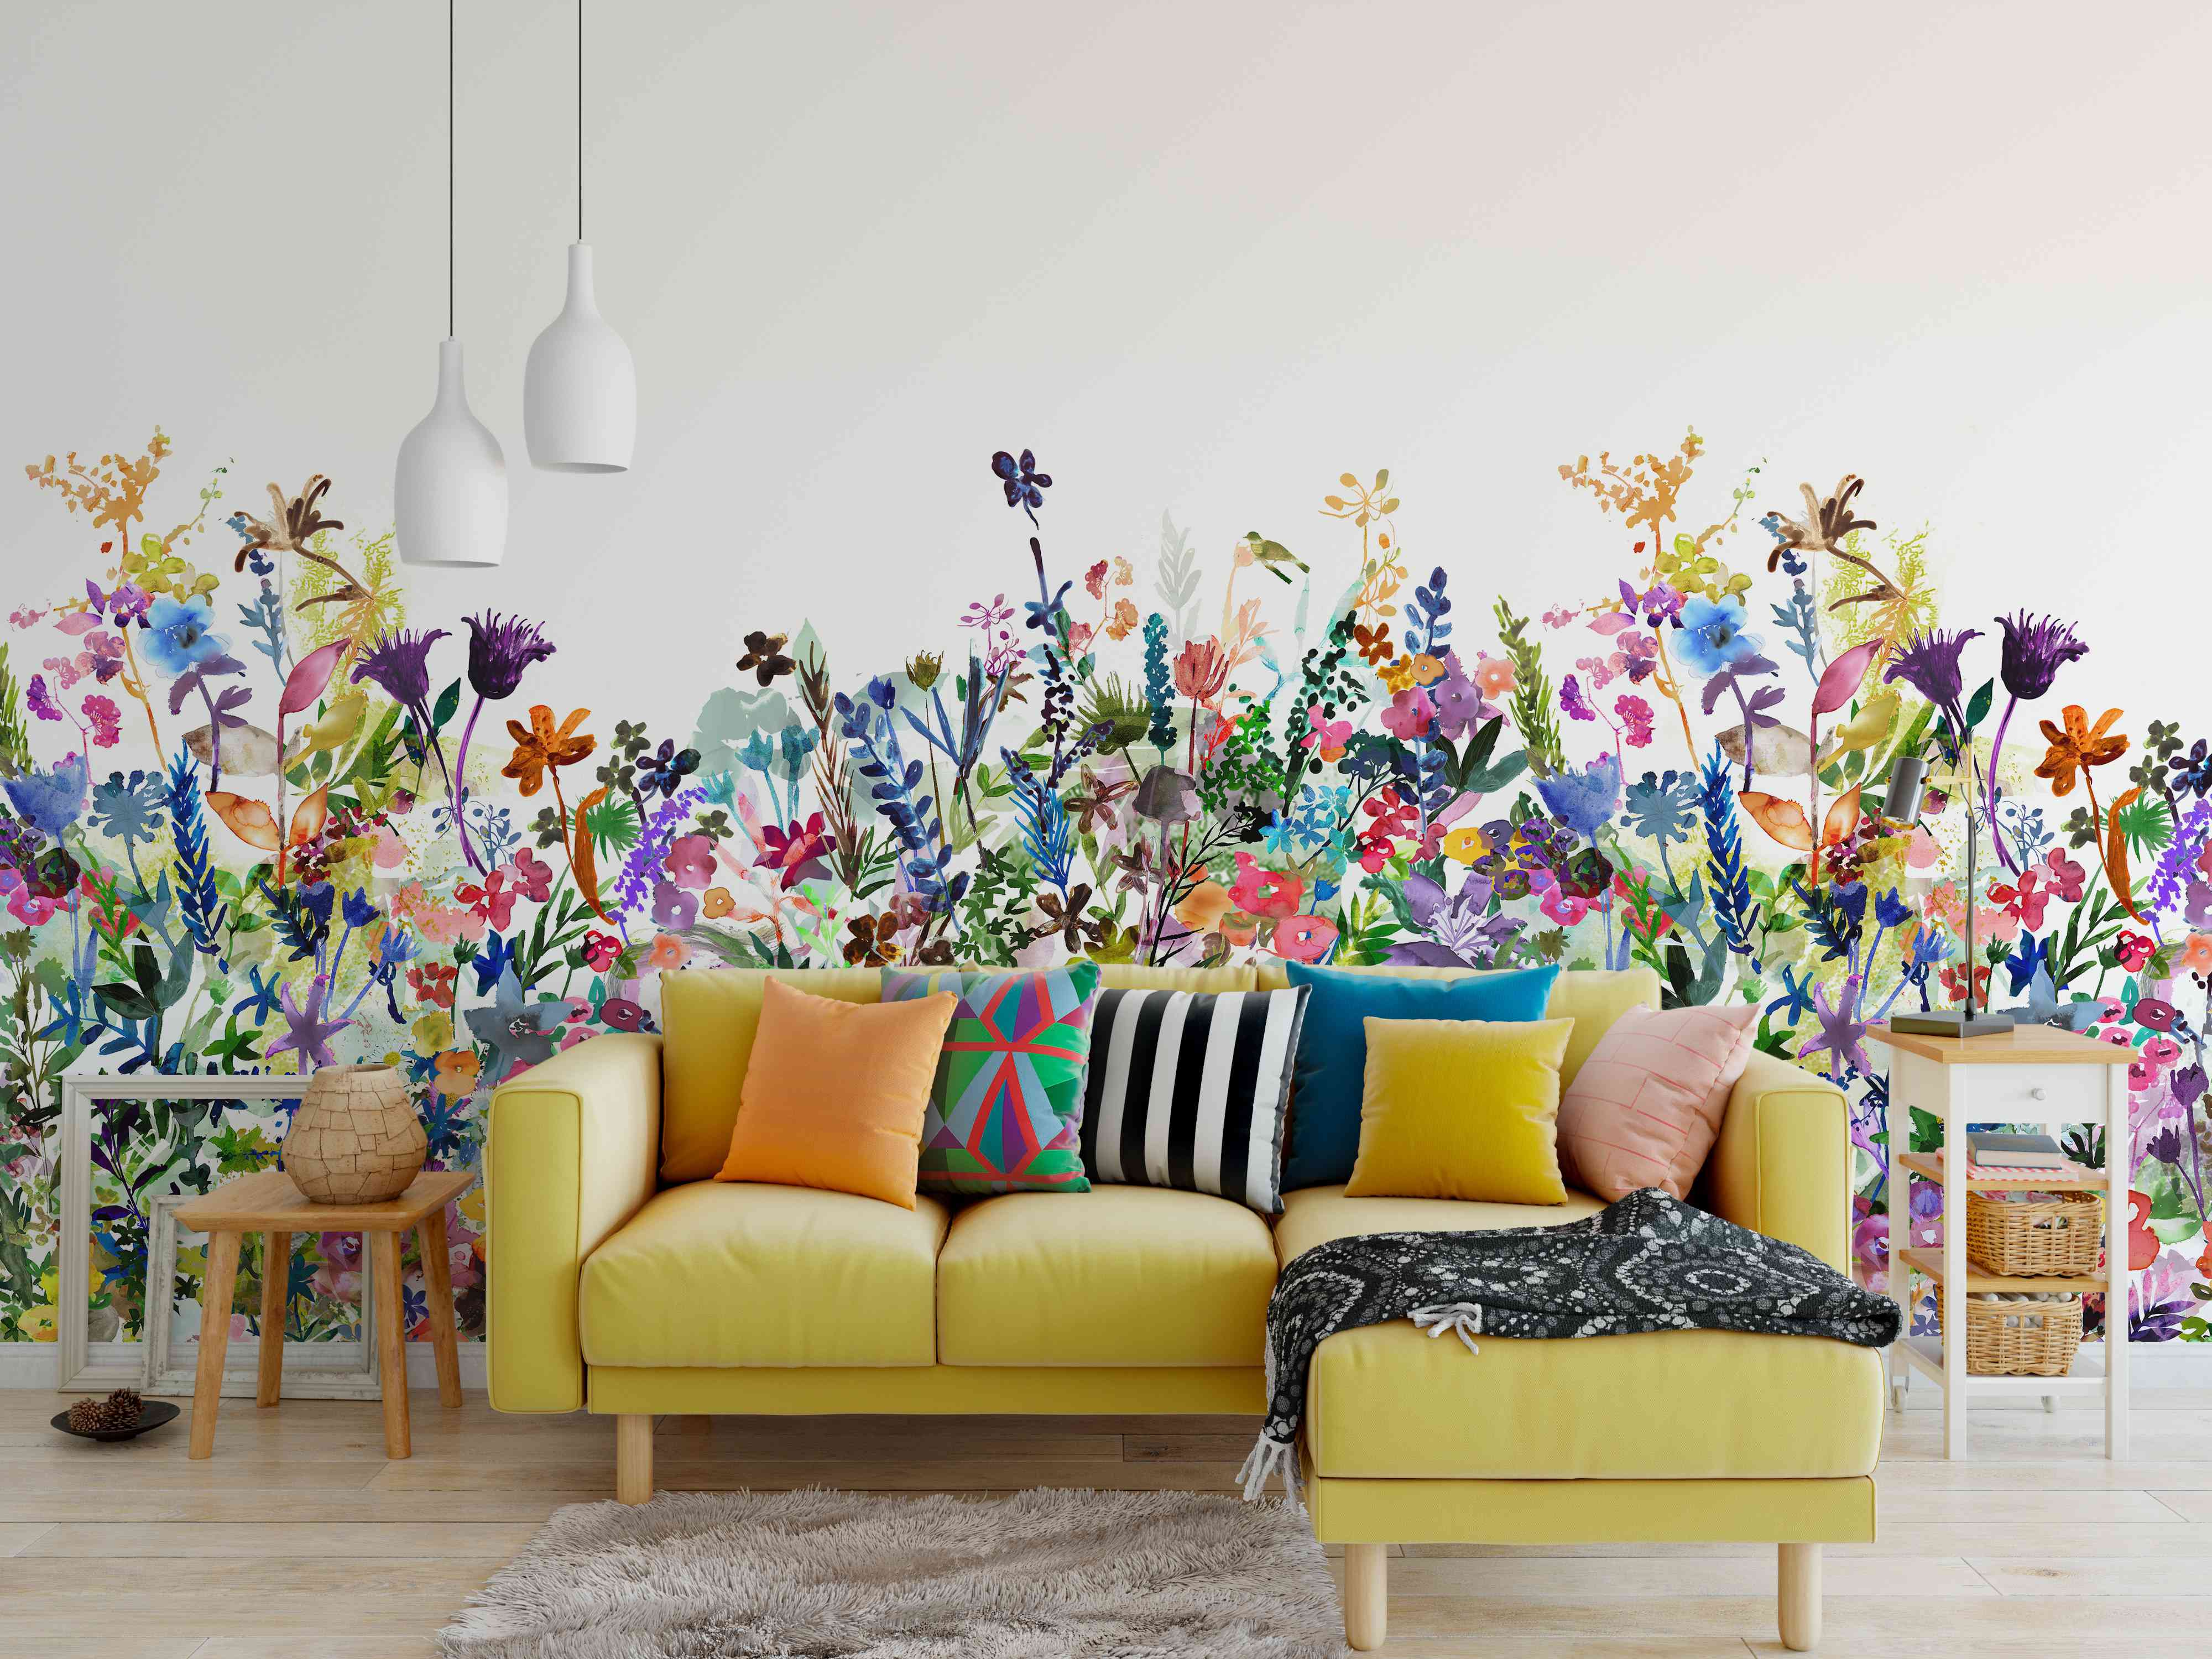 Bright Wallpaper Ideas That Are Fun And Colorful